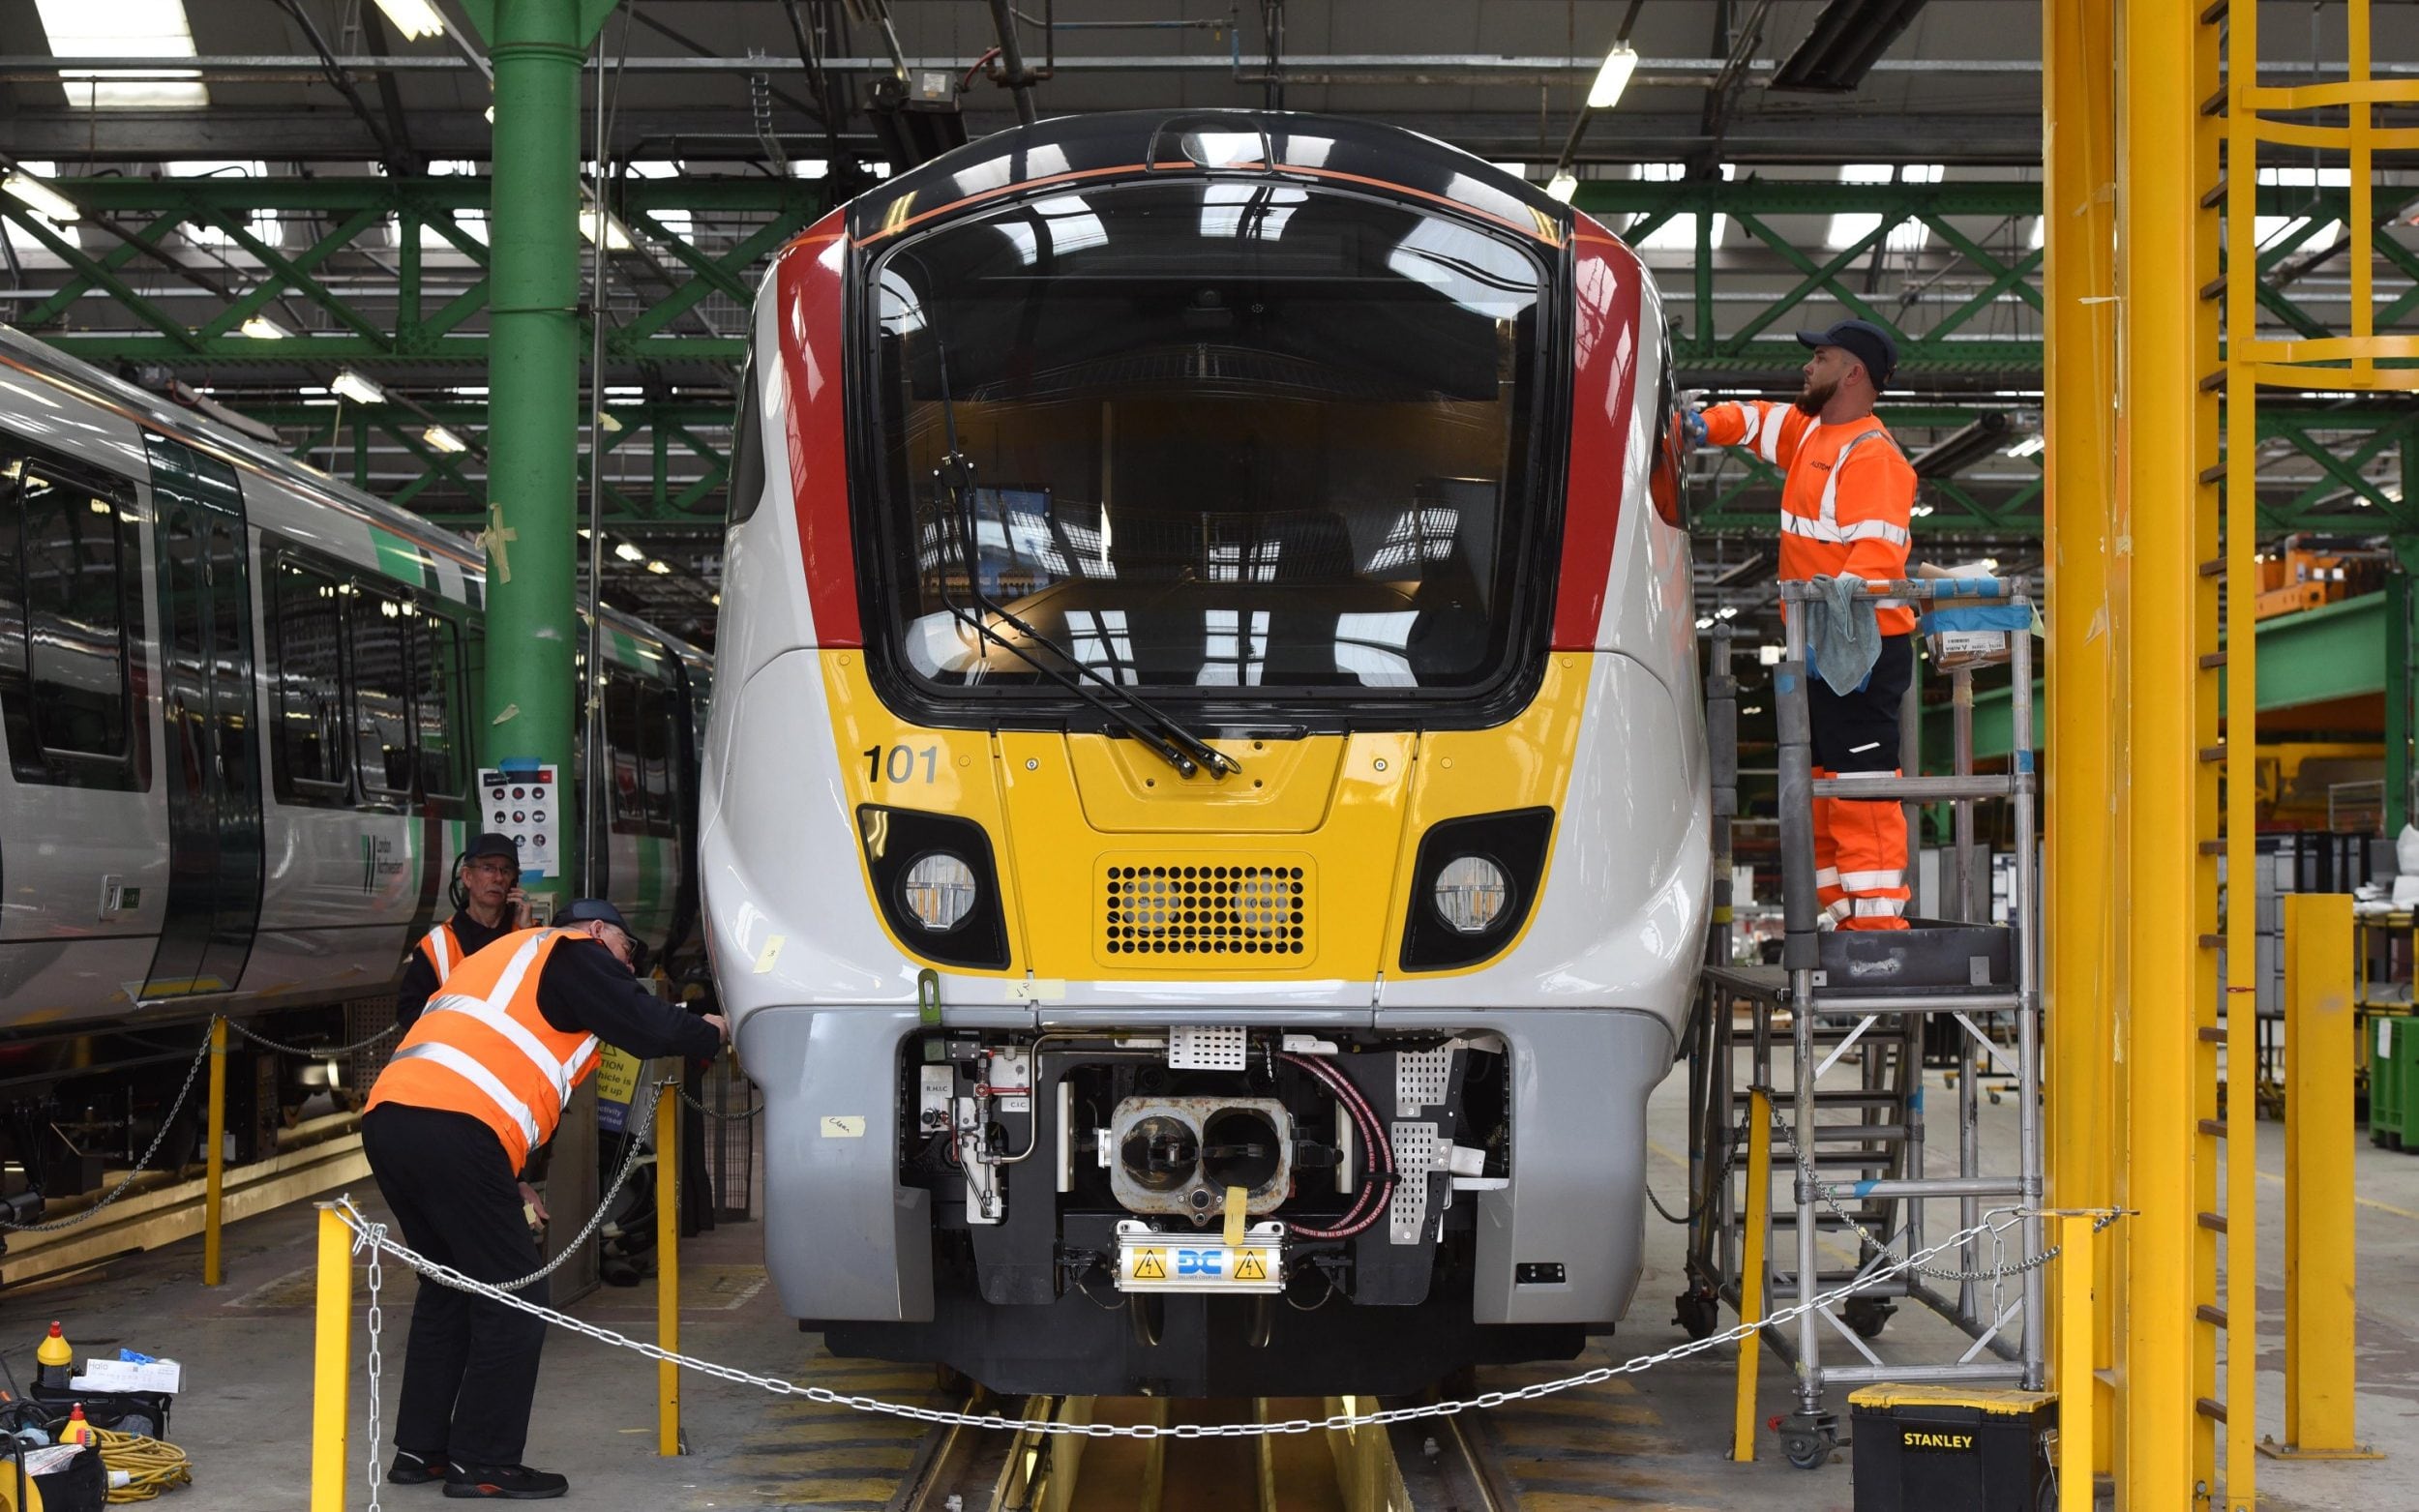 last-minute deal saves britain’s biggest train factory from closure